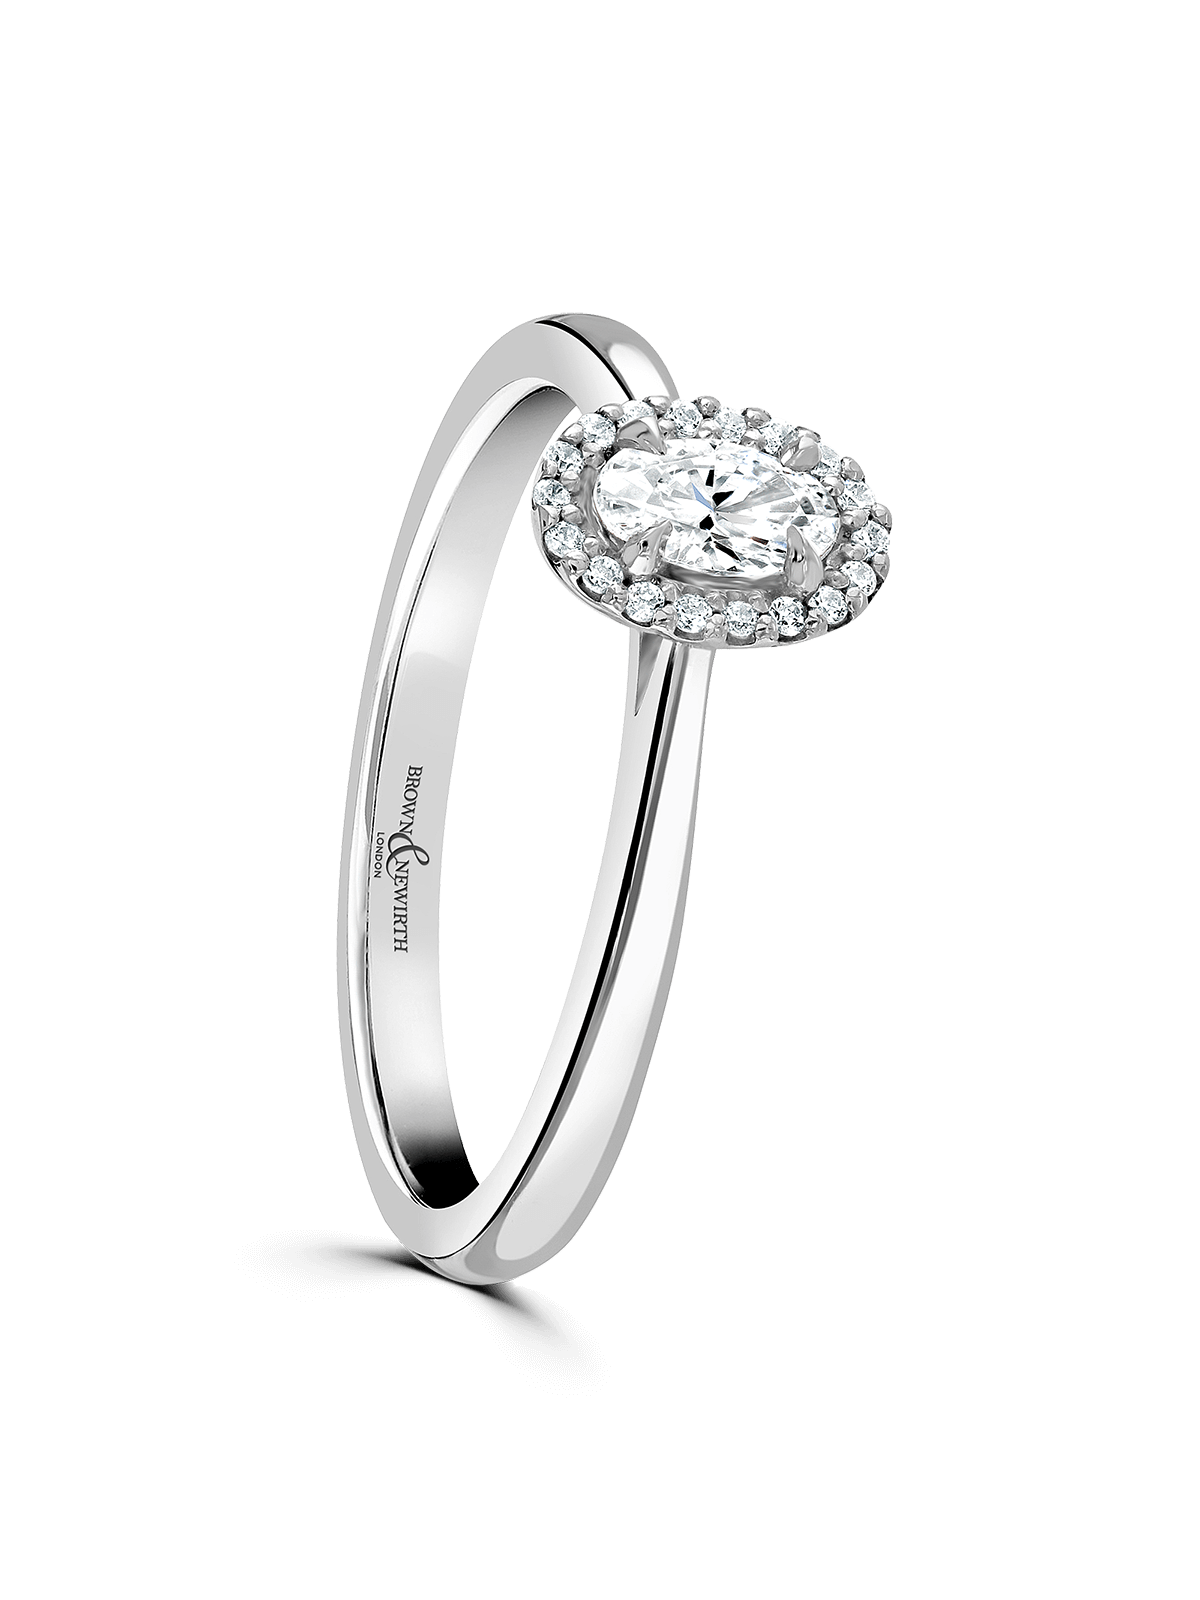 Brown & Newirth Carina 0.50ct Oval Cut Certificated Diamond Halo Engagement Ring in Platinum